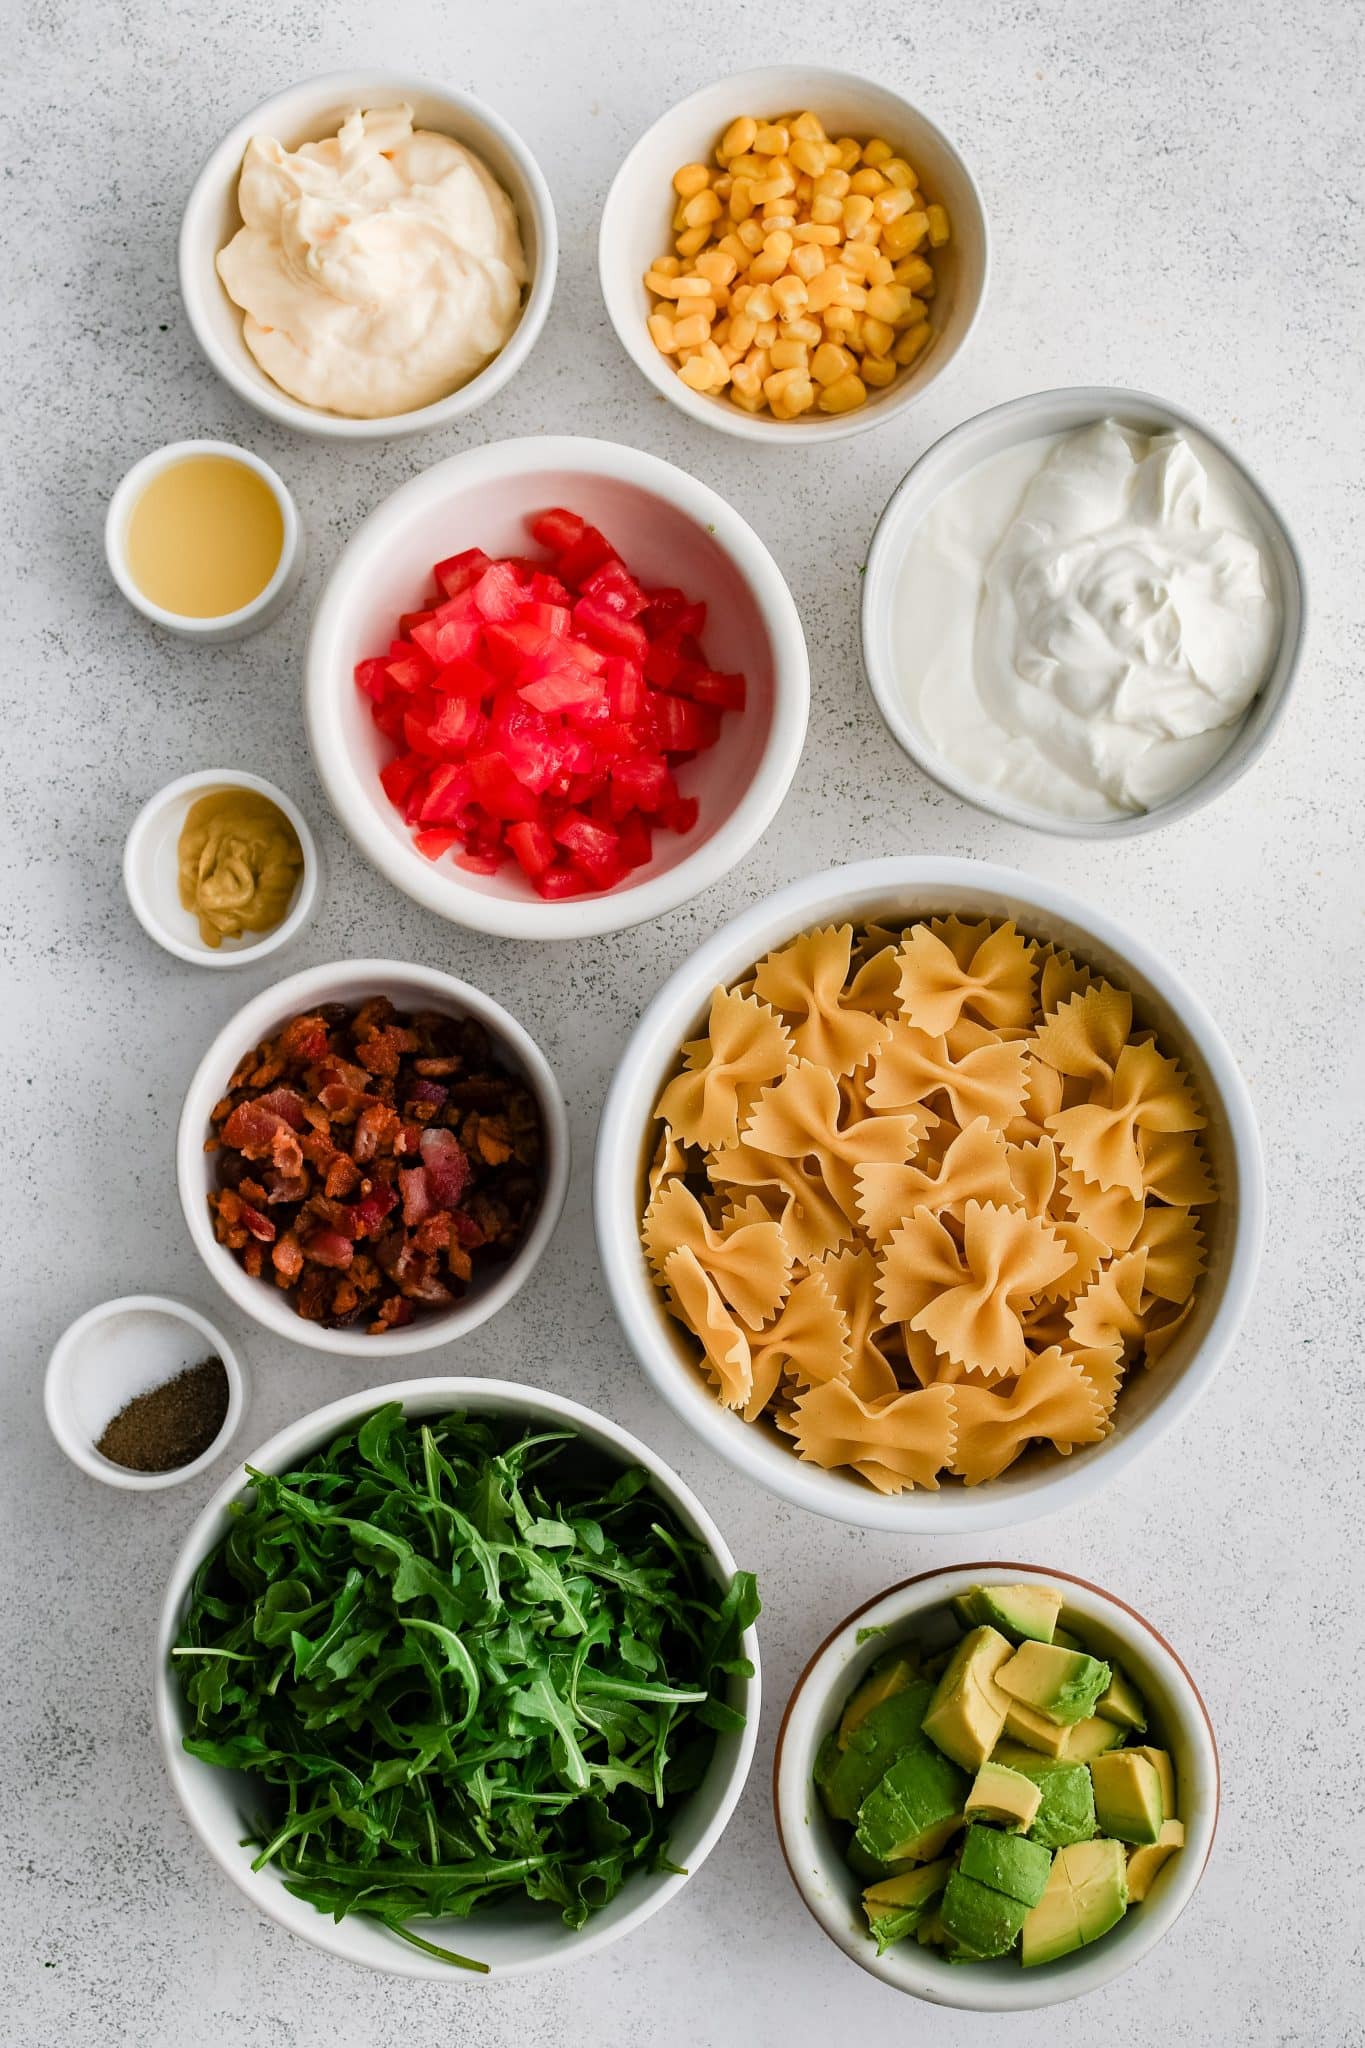 All of the ingredients for BLT Pasta Salad presented in individual measuring cups and ramekins.